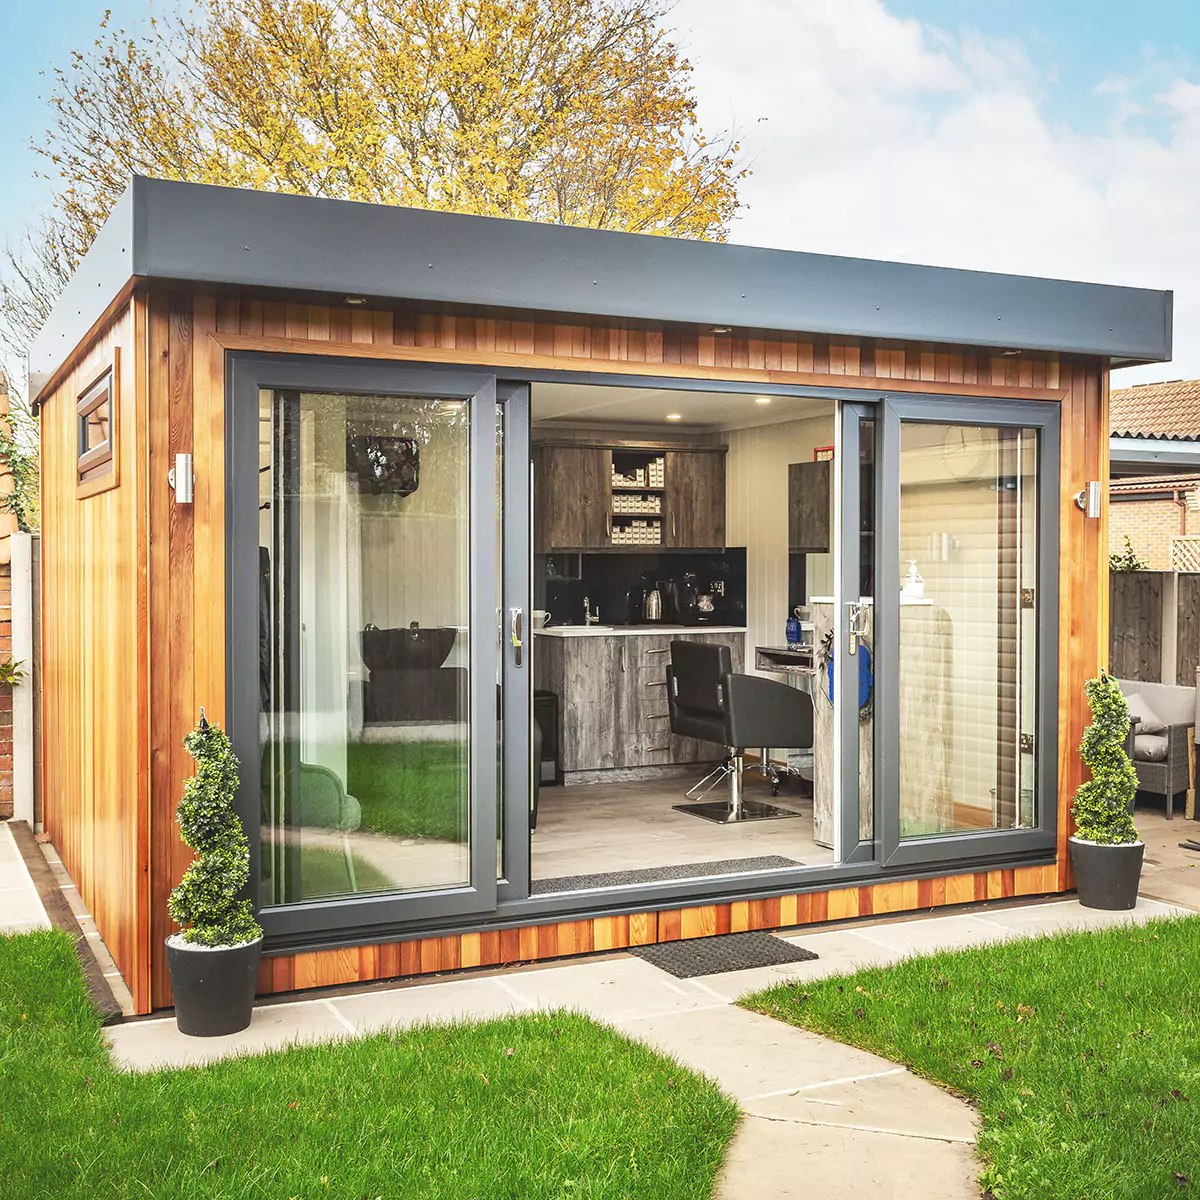 Hairdresser Studio in garden with patio pathway and grassy area and potted plants and sliding doors with internal view of room with black leather chair  